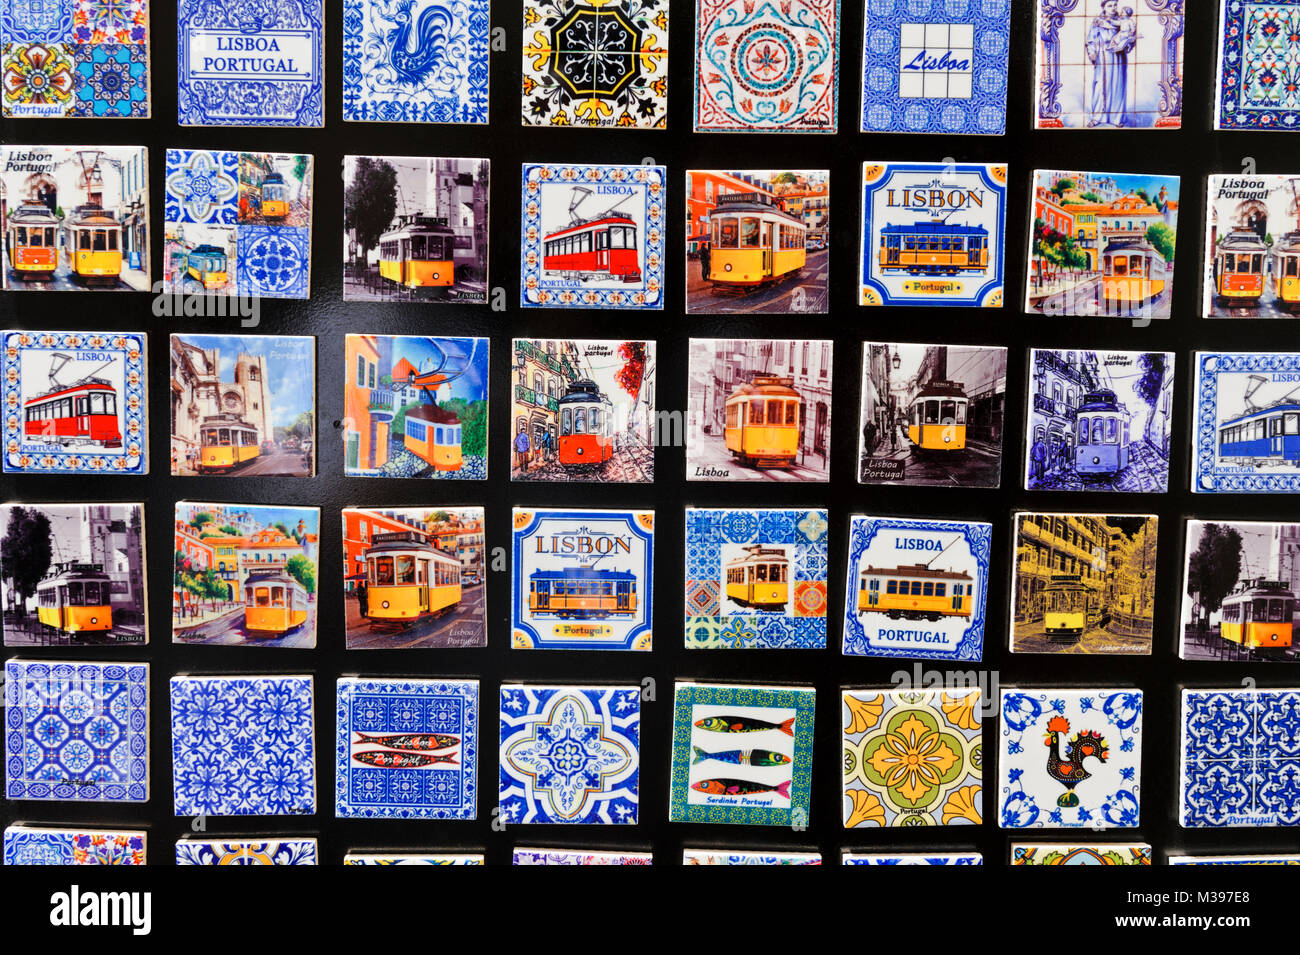 Portuguese fridge magnets hi-res stock and images - Alamy